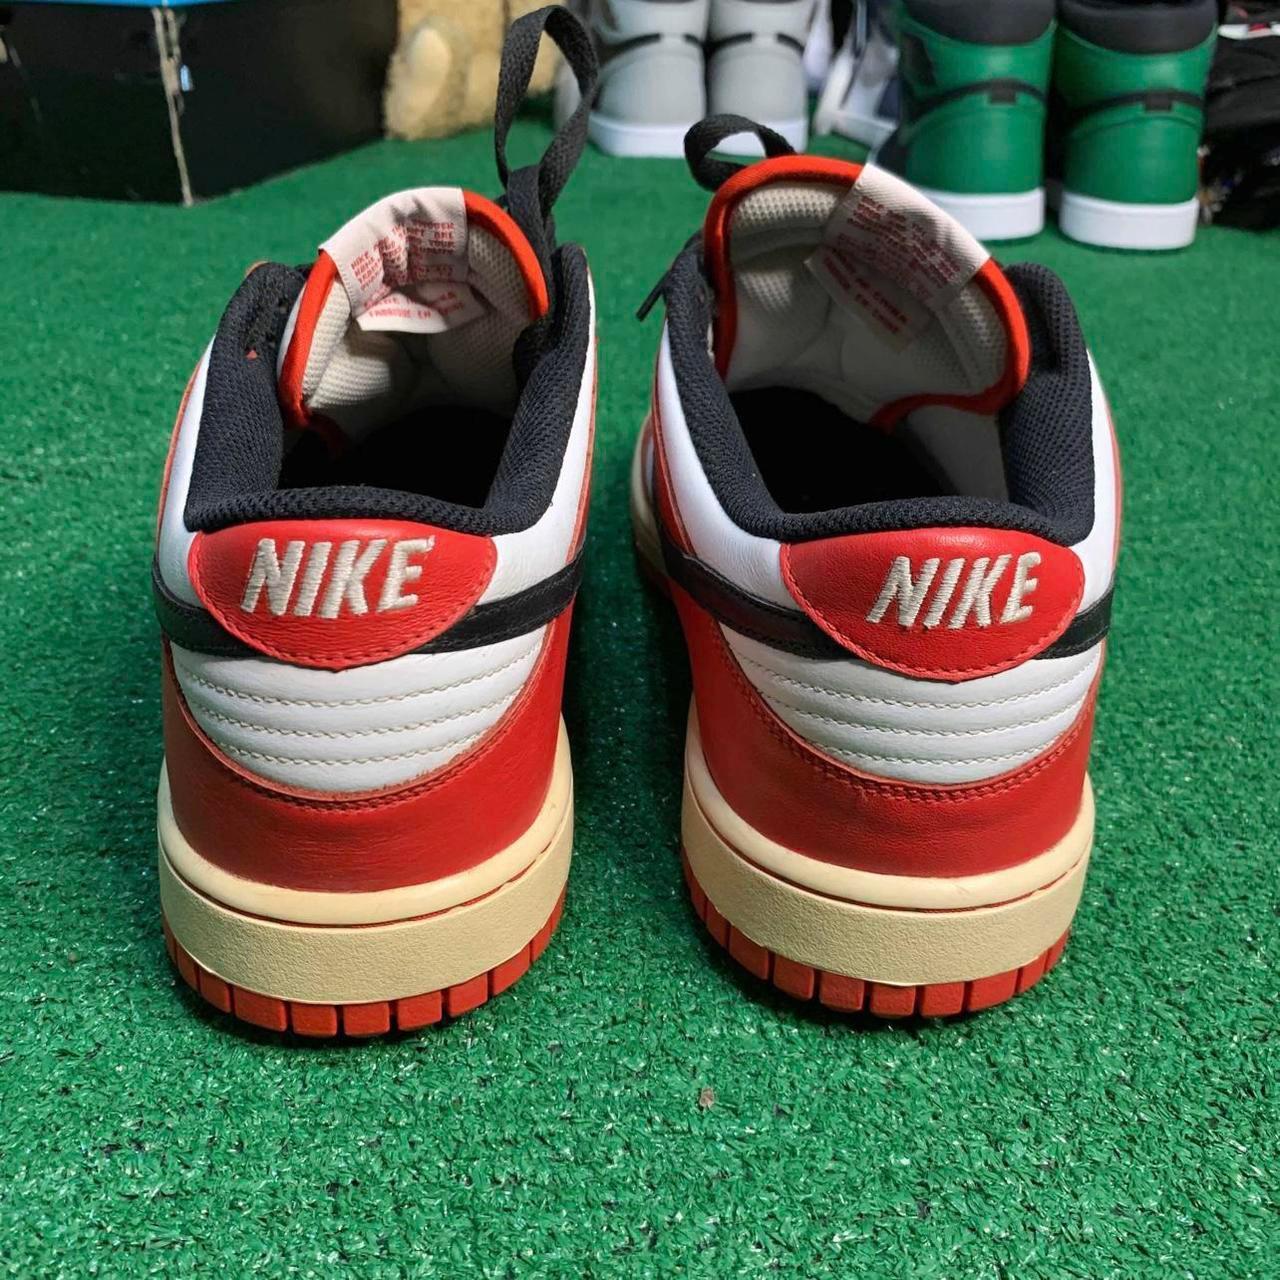 NIKE AIR DUNK LOW NG GOLF “Chicago” Size - 11.5... - Depop